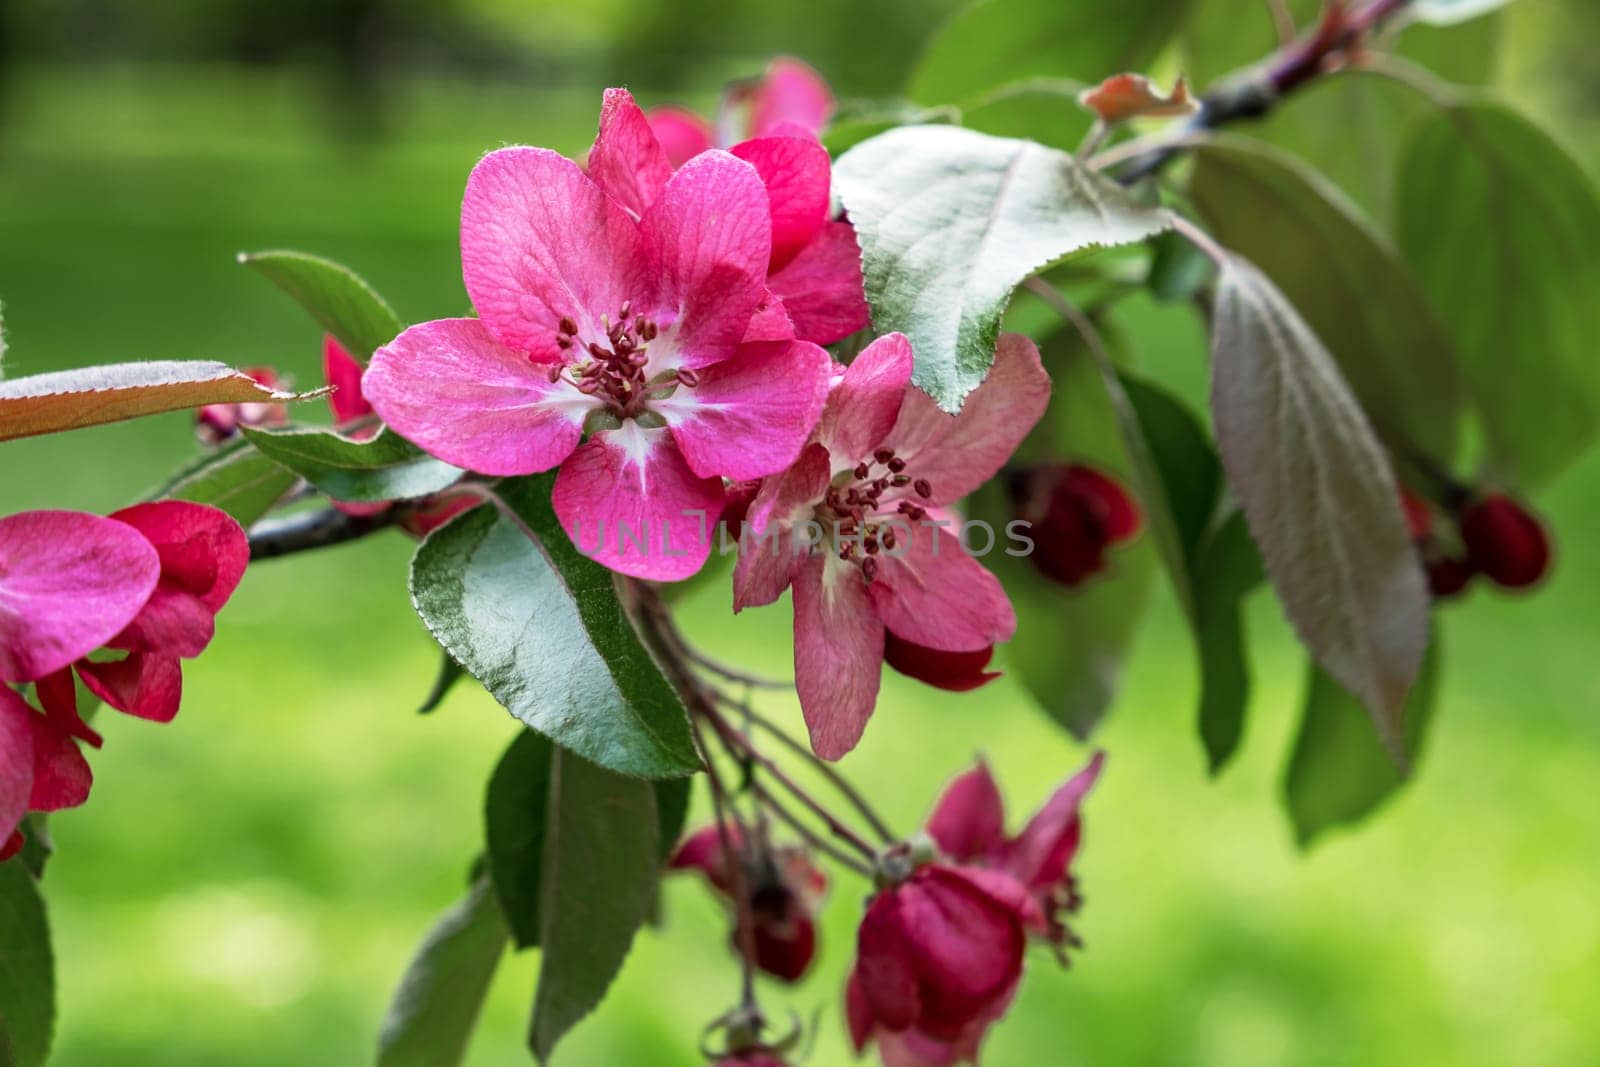 Pink apple tree flowers on a branch in spring. Beauty in nature. Gardening. Selective focus.